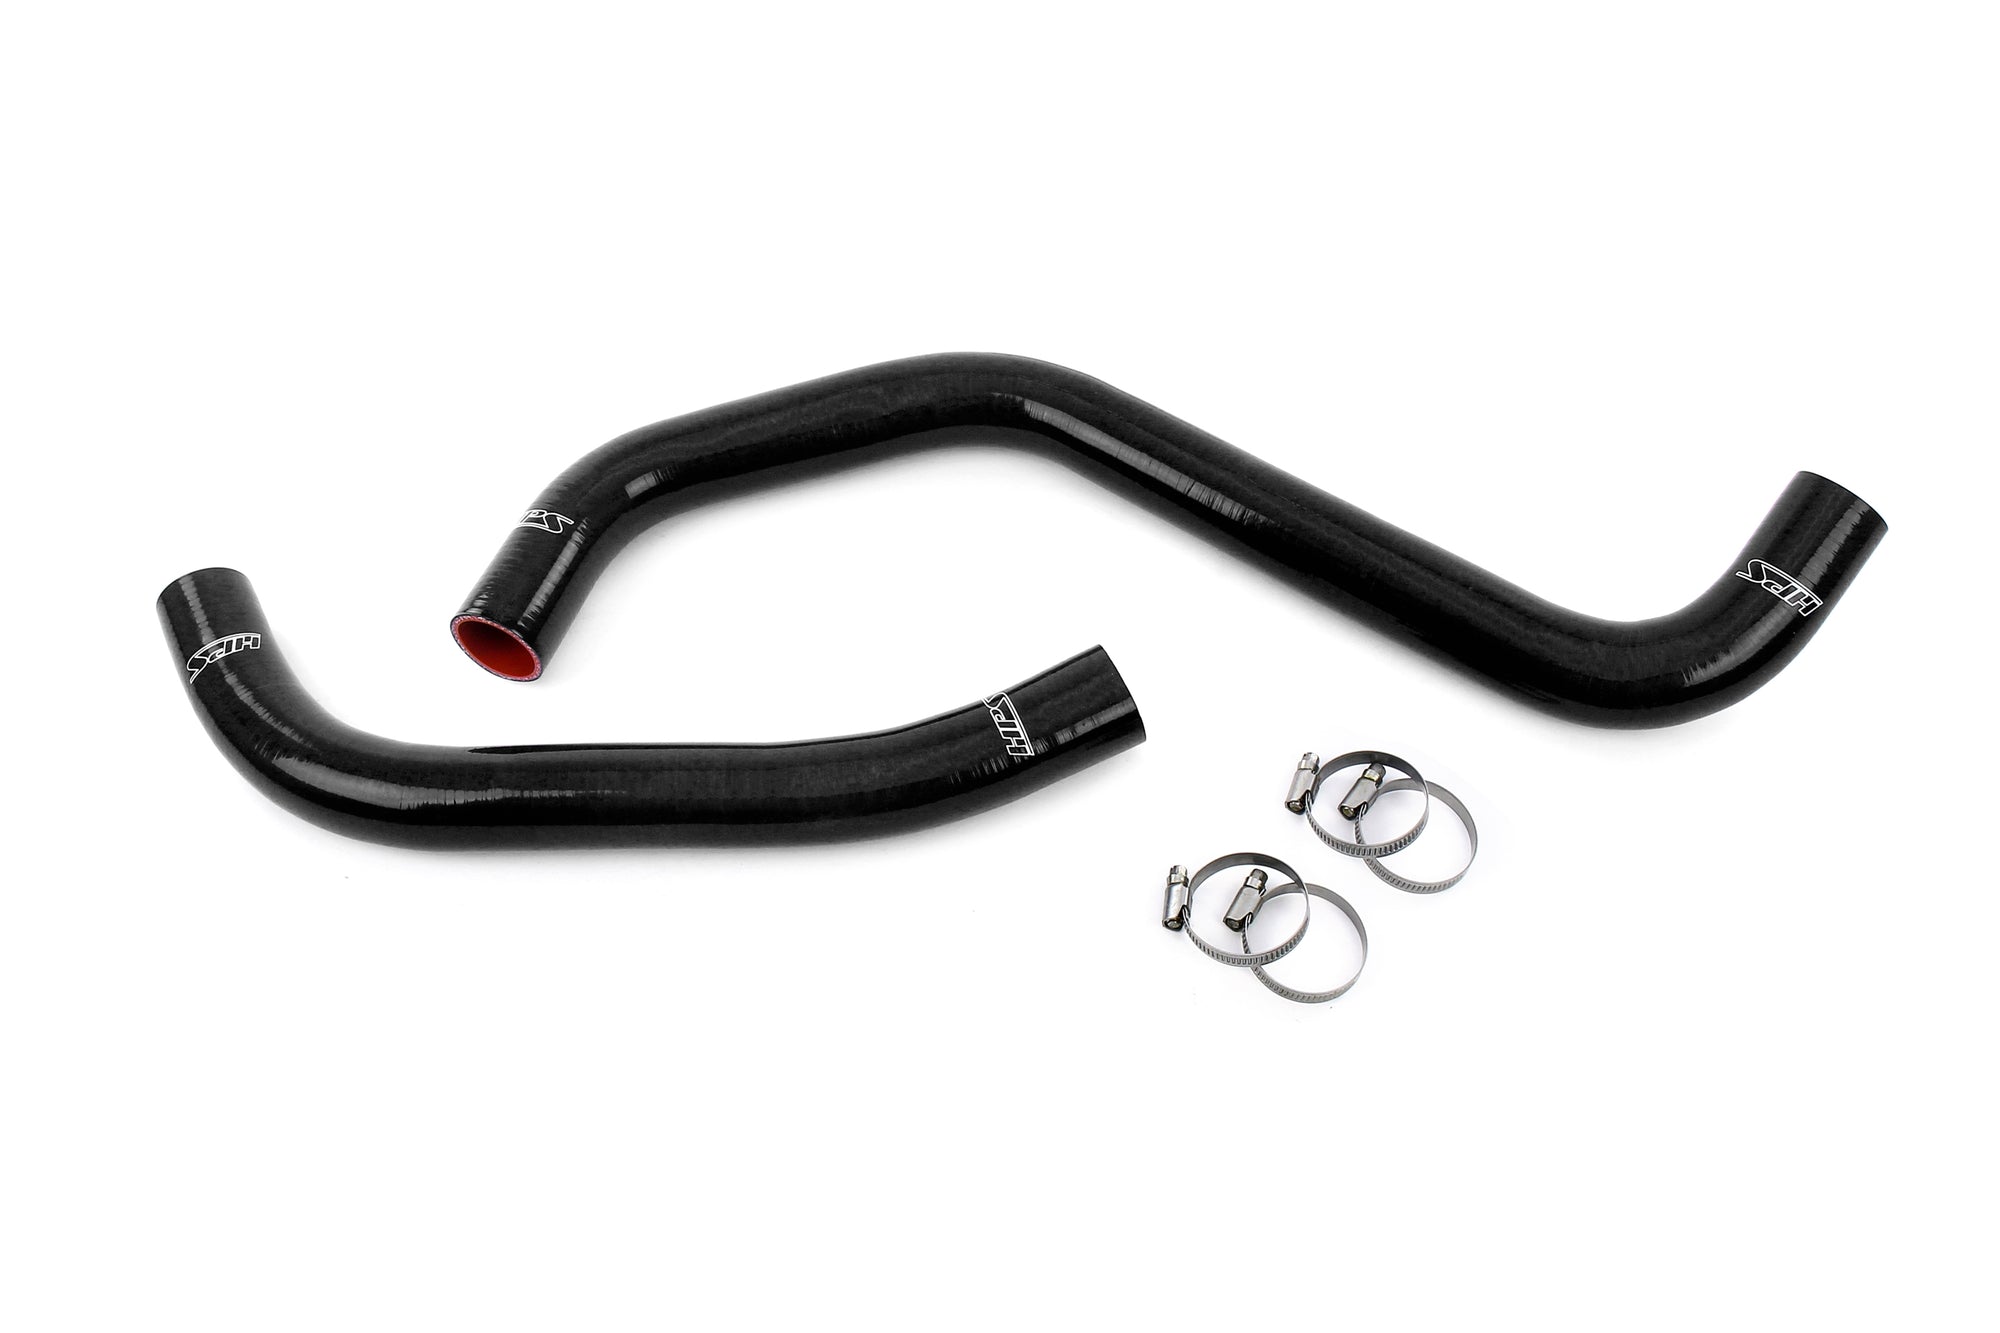 HPS Silicone Radiator Coolant Hose Kit 2005-2009 Jeep Grand Cherokee 4.7L V8 WK1 57-1703 Red